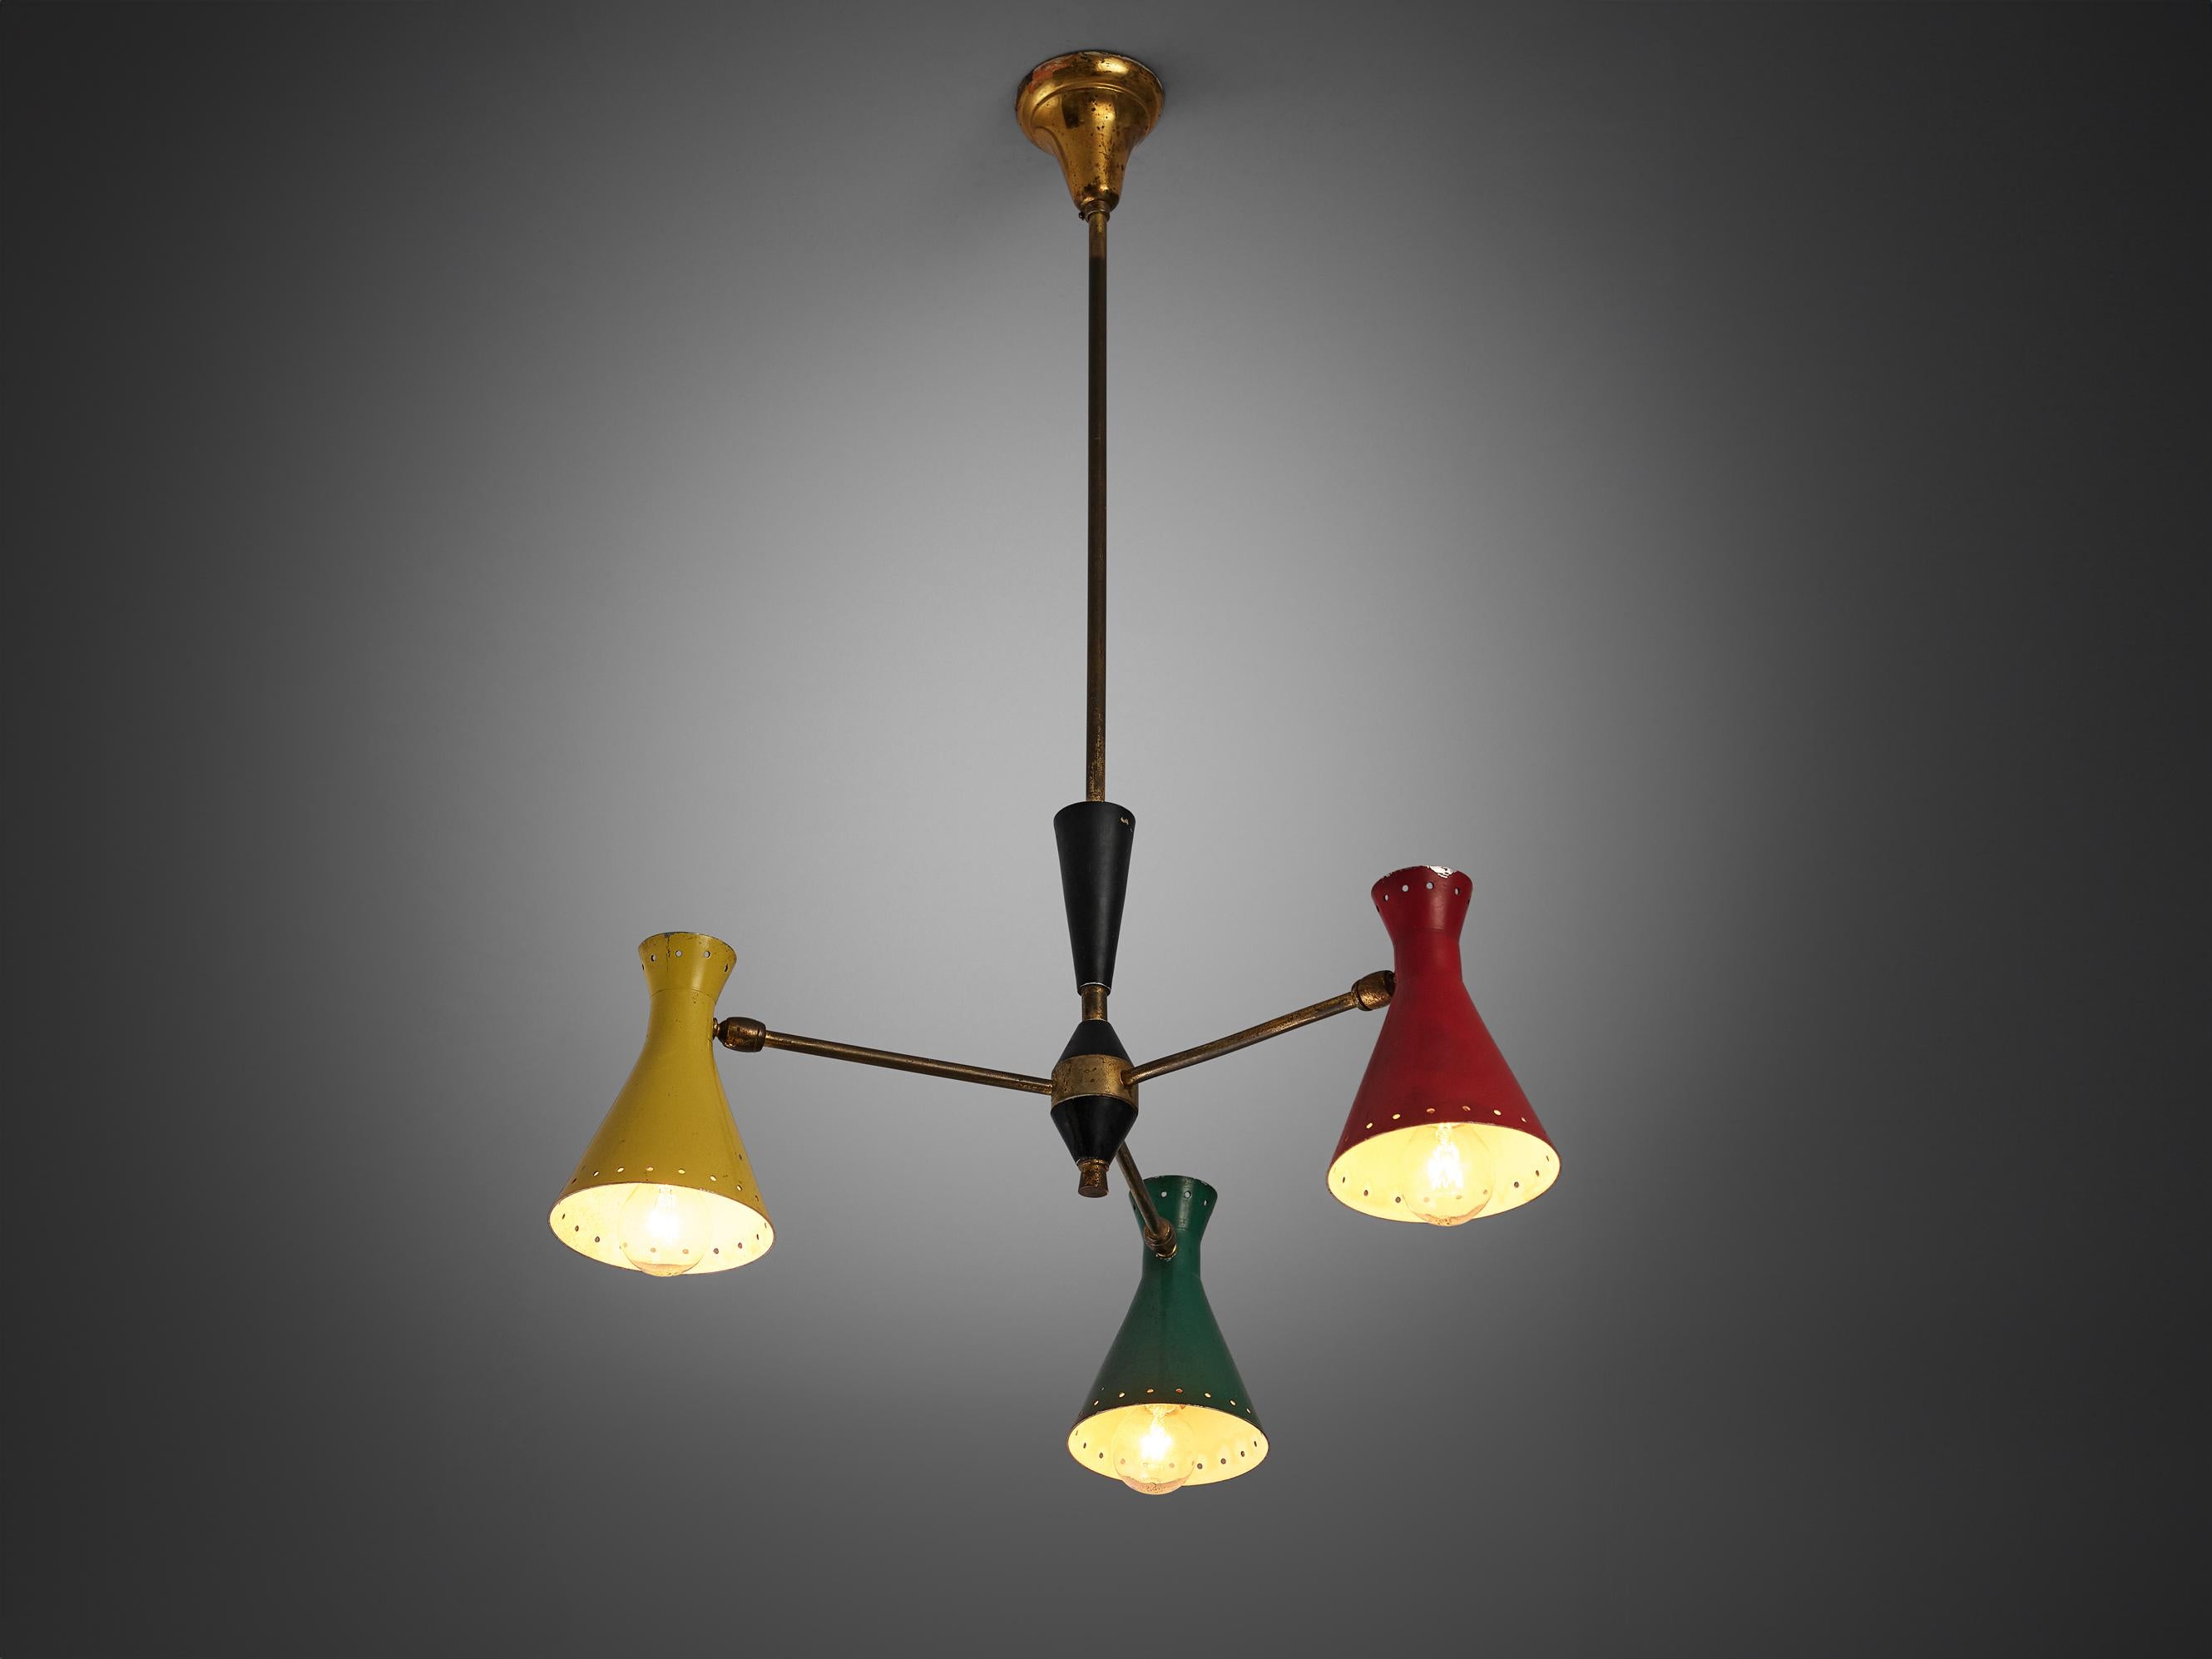 Chandelier, metal, brass, Italy, 1950s

Beautiful Italian chandelier with colourful cone shaped shades. A tripod frame in brass holds the green, red, and yellow shades with perforations along the sides that can be adjusted in their angle. The lamp